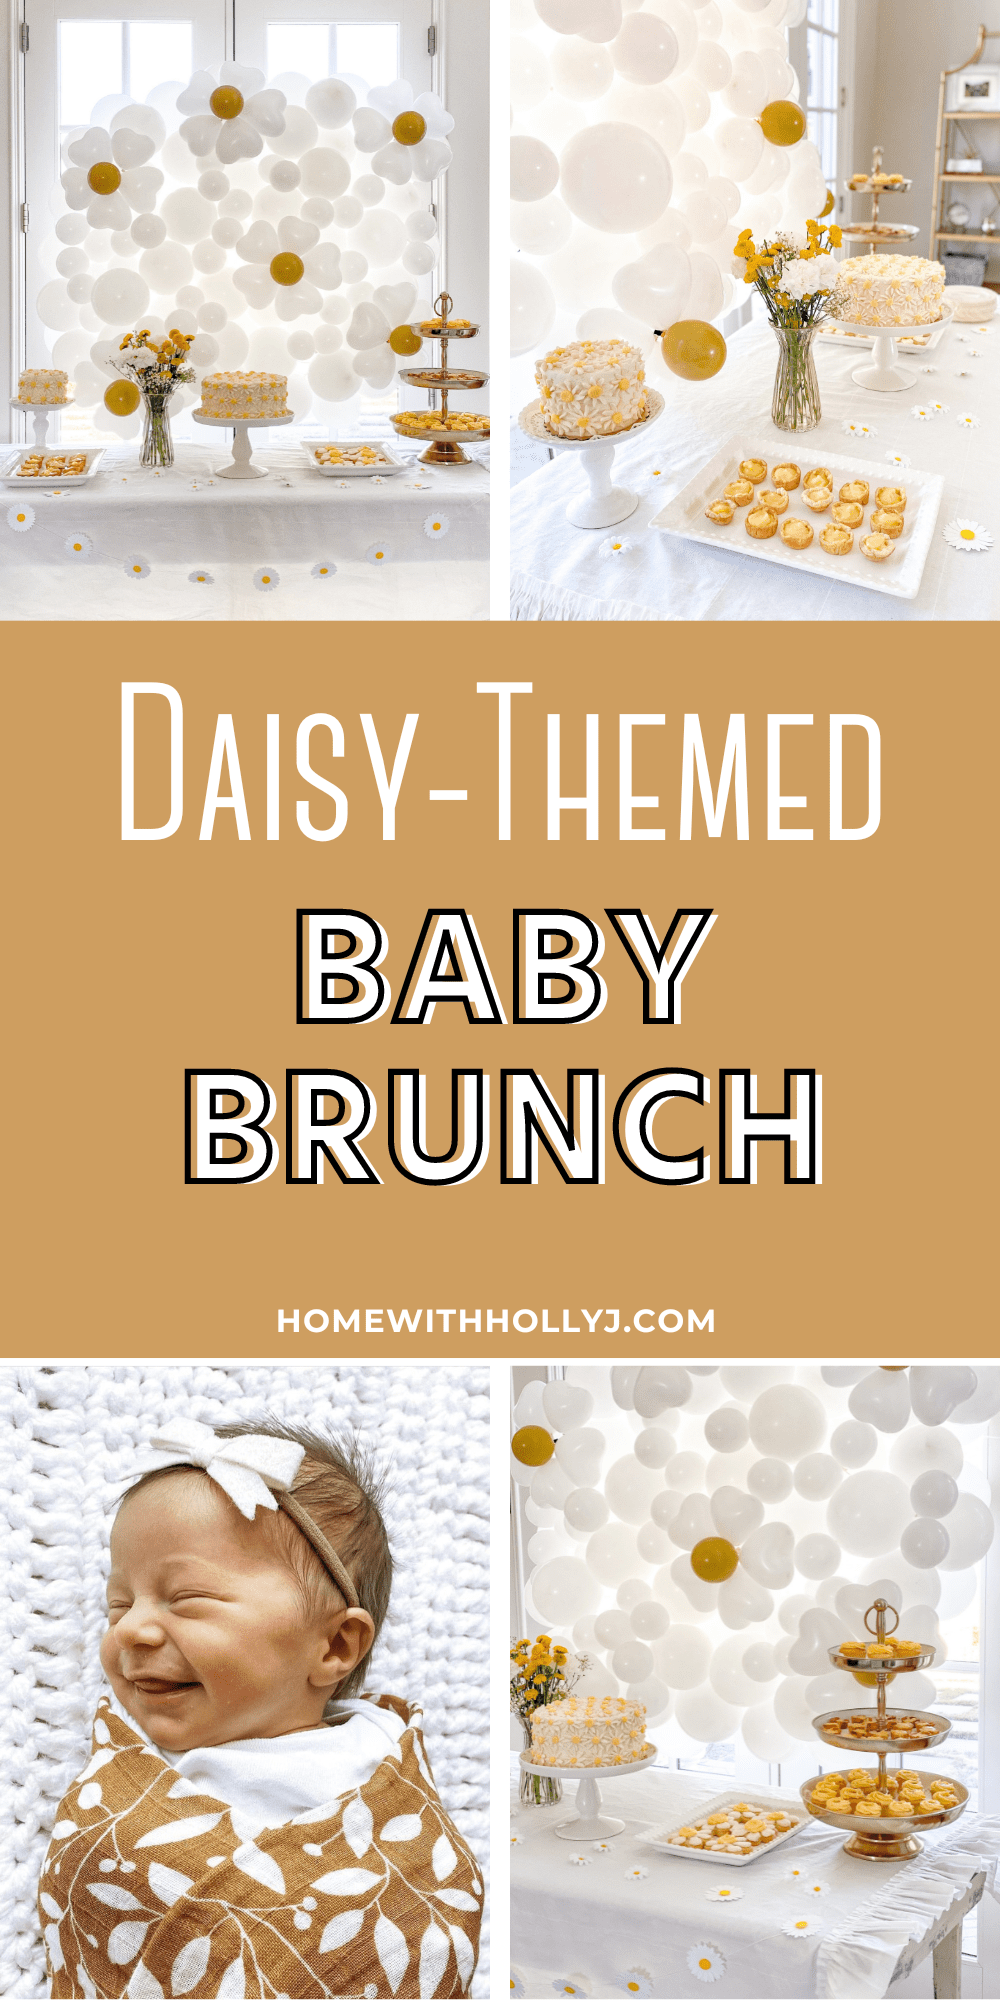 Sharing ideas and tips on hosting a beautiful spring baby brunch with daisies, desserts, balloons, and so much more